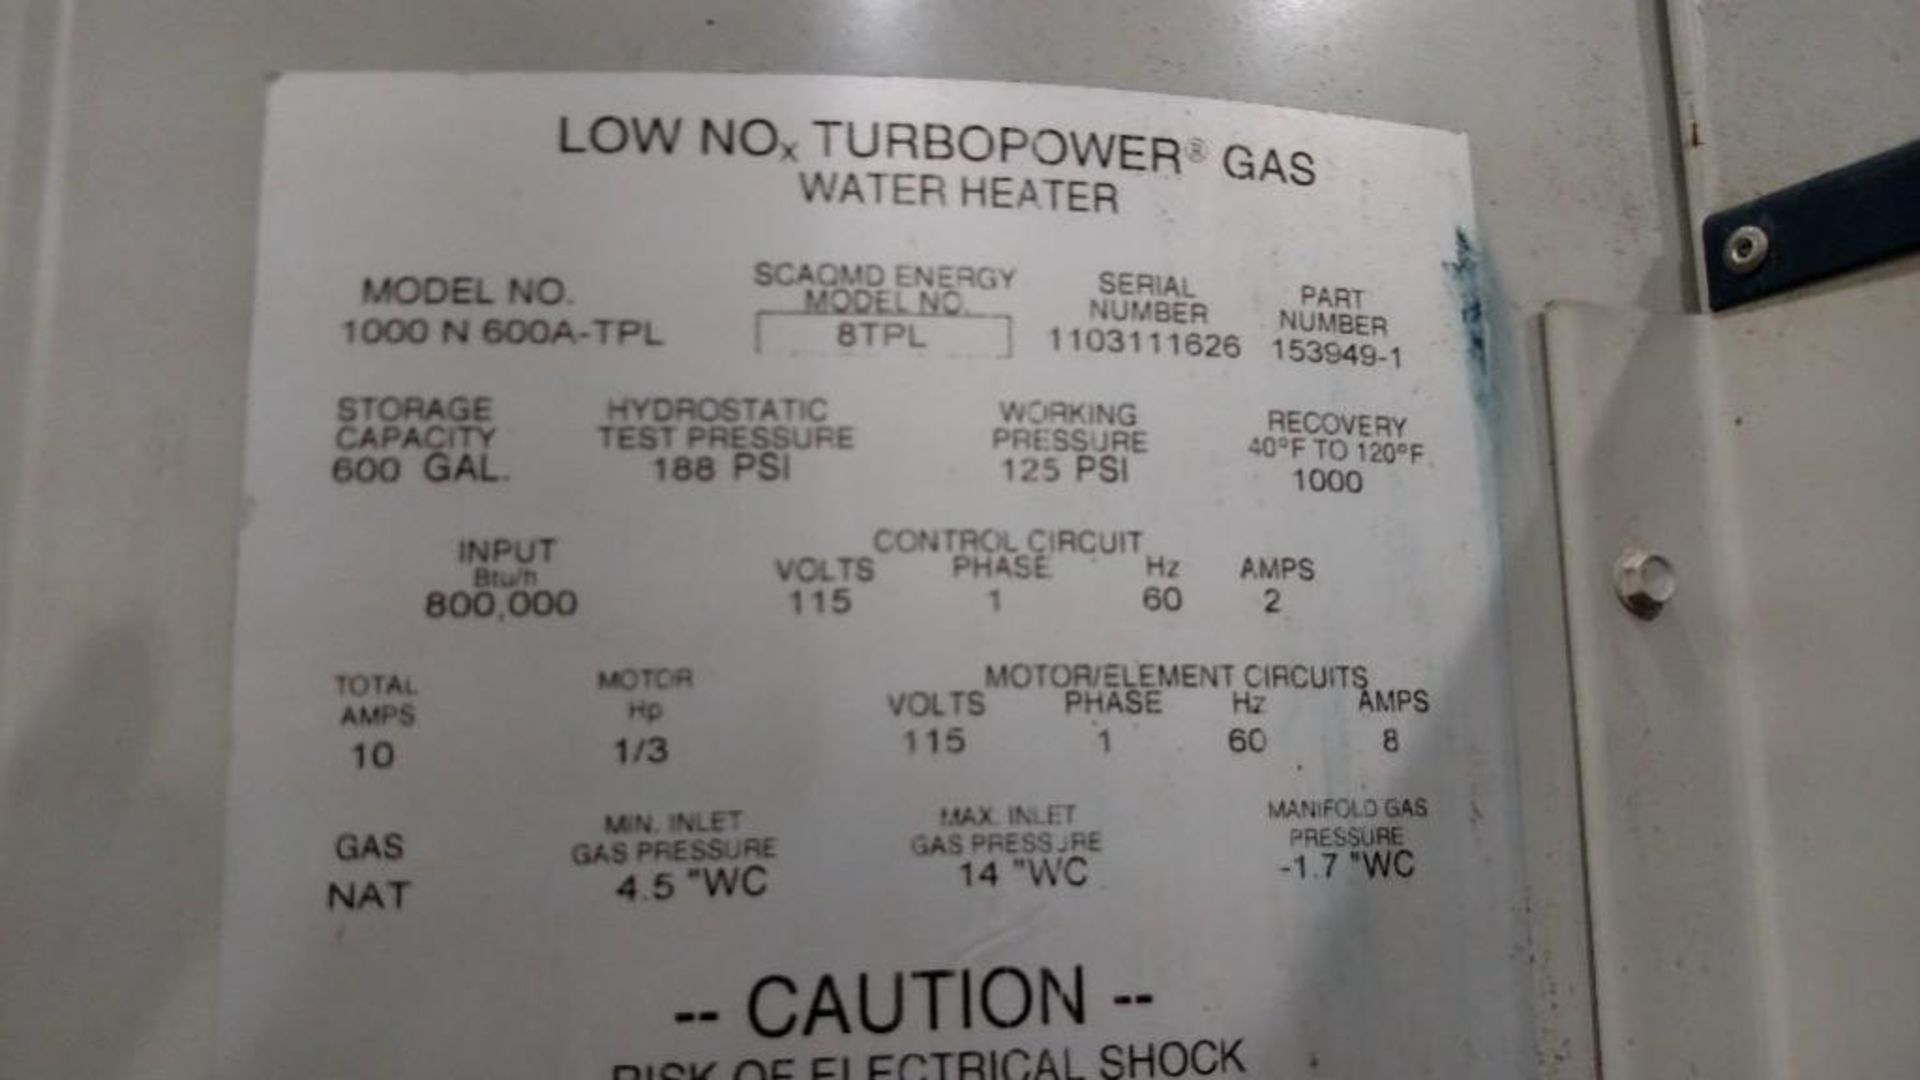 PVI natural gas commercial water heater, 600 gal, 120 v, 800,000 btu / Rigging Fee: $100 - Image 4 of 4